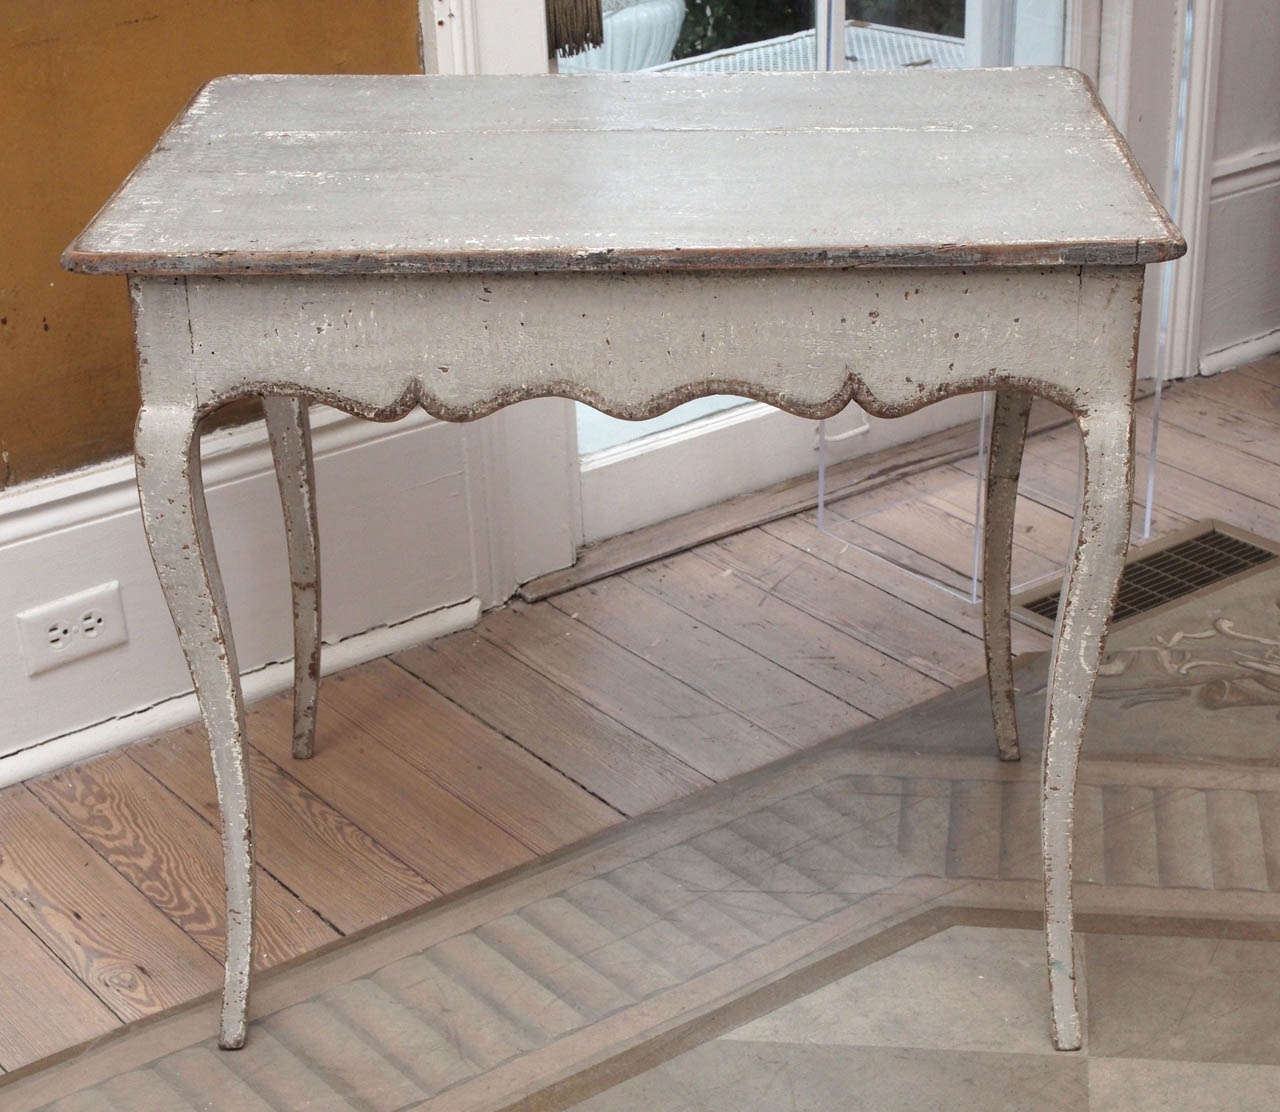 Painted Louis XV style tea table with scalloped apron and cabriole legs.